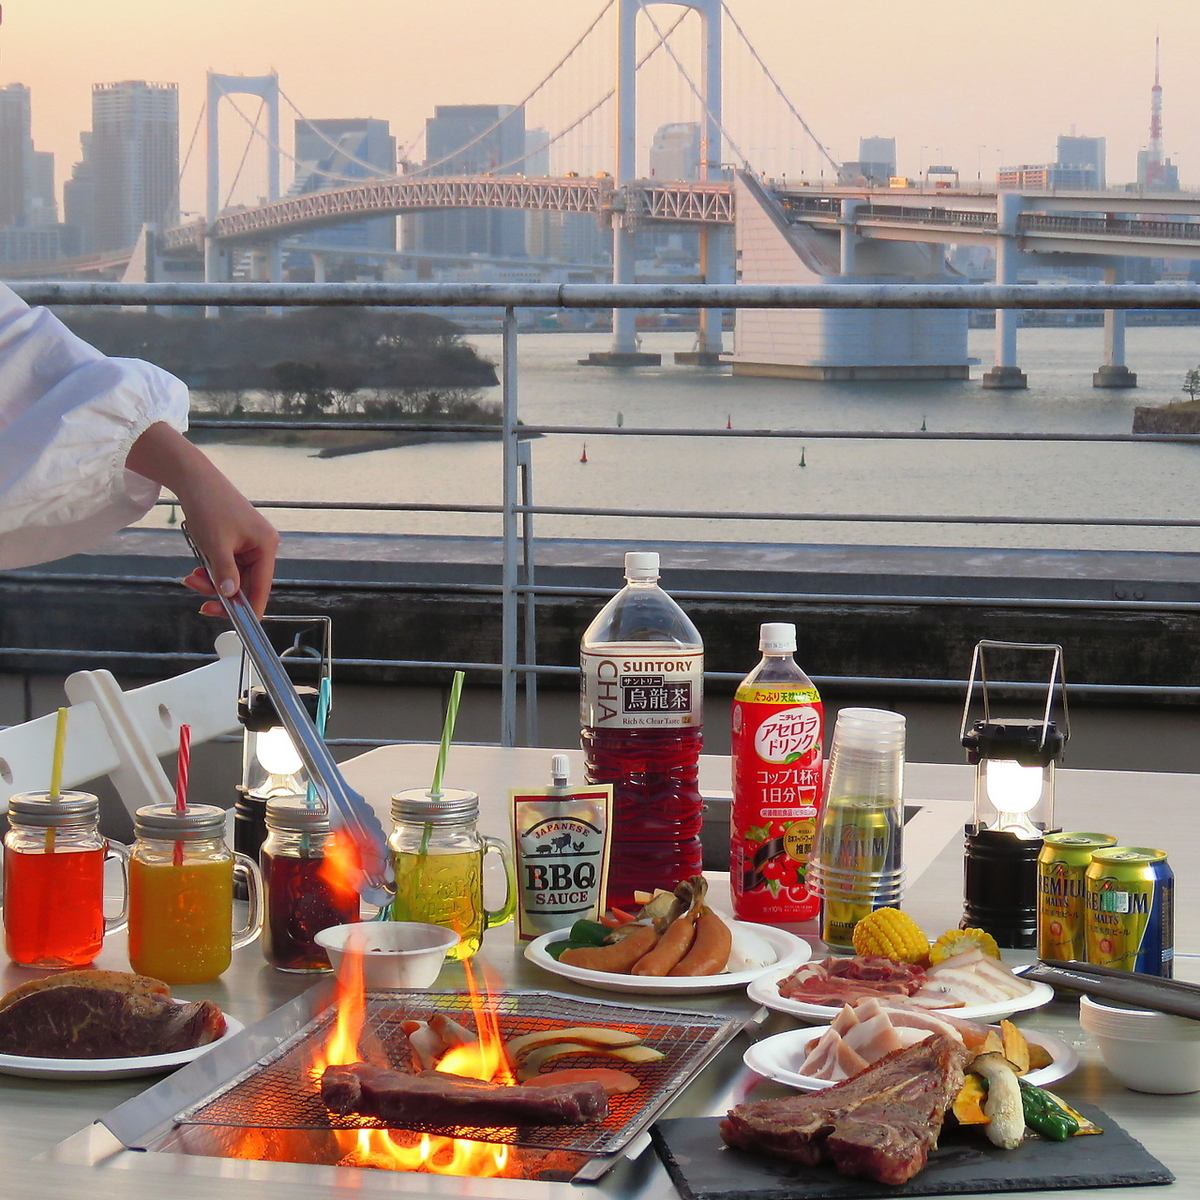 You can enjoy BBQ at 11: 00-14: 00/15: 00-18: 00/19: 00-22: 00 ♪